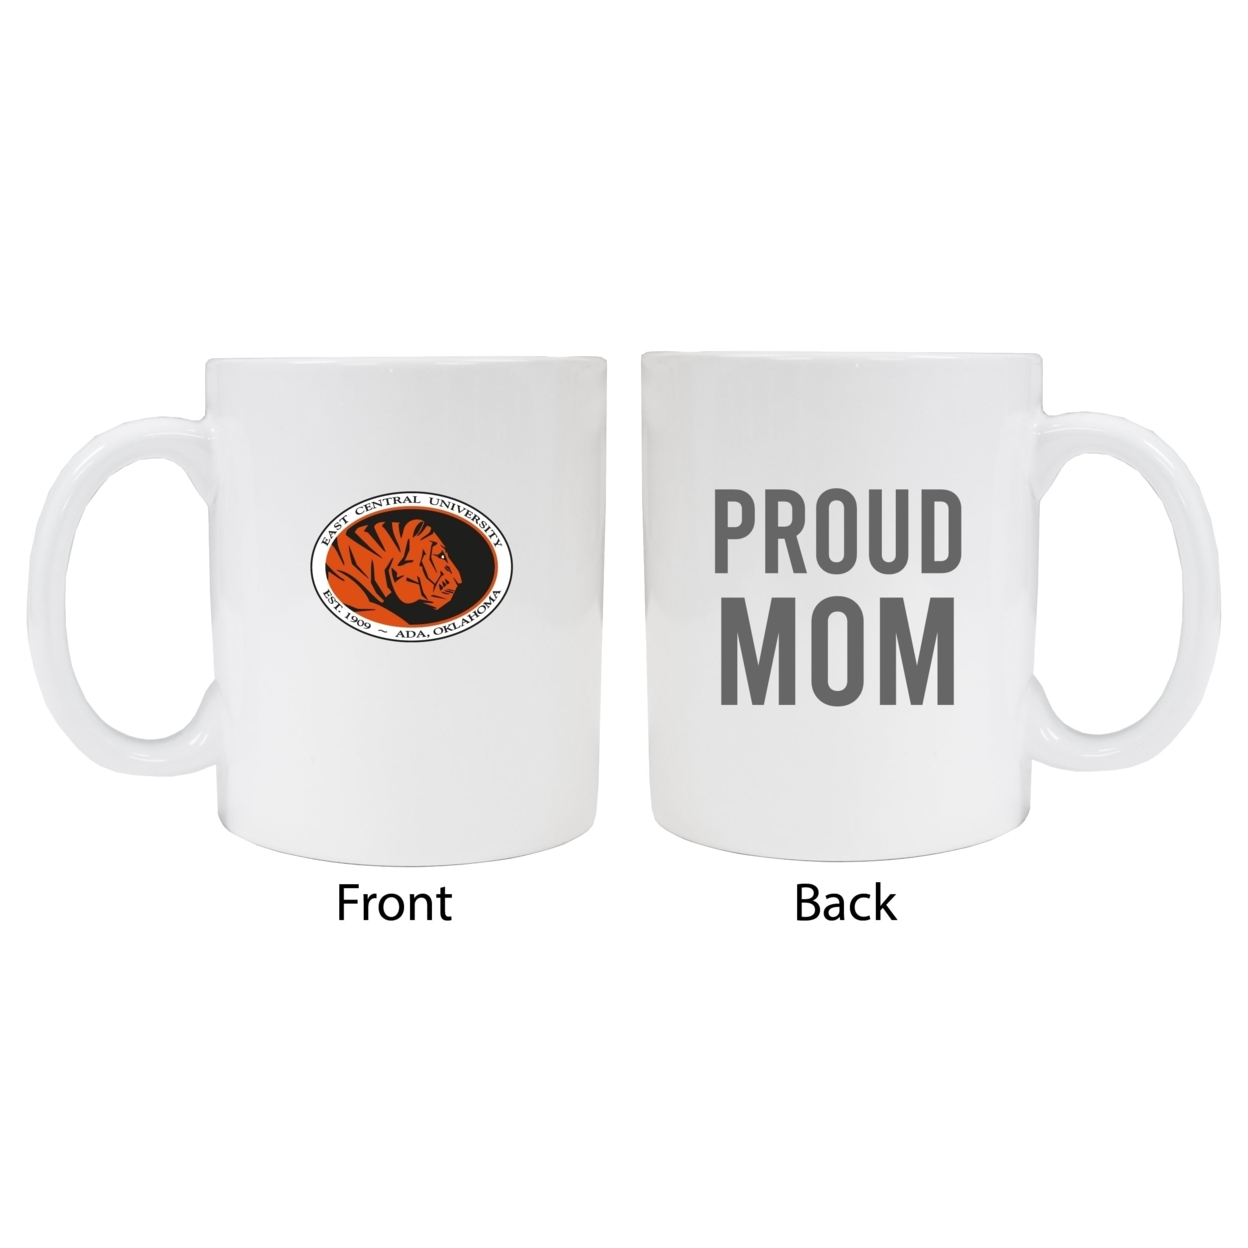 East Central University Tigers Proud Mom Ceramic Coffee Mug - White (2 Pack)